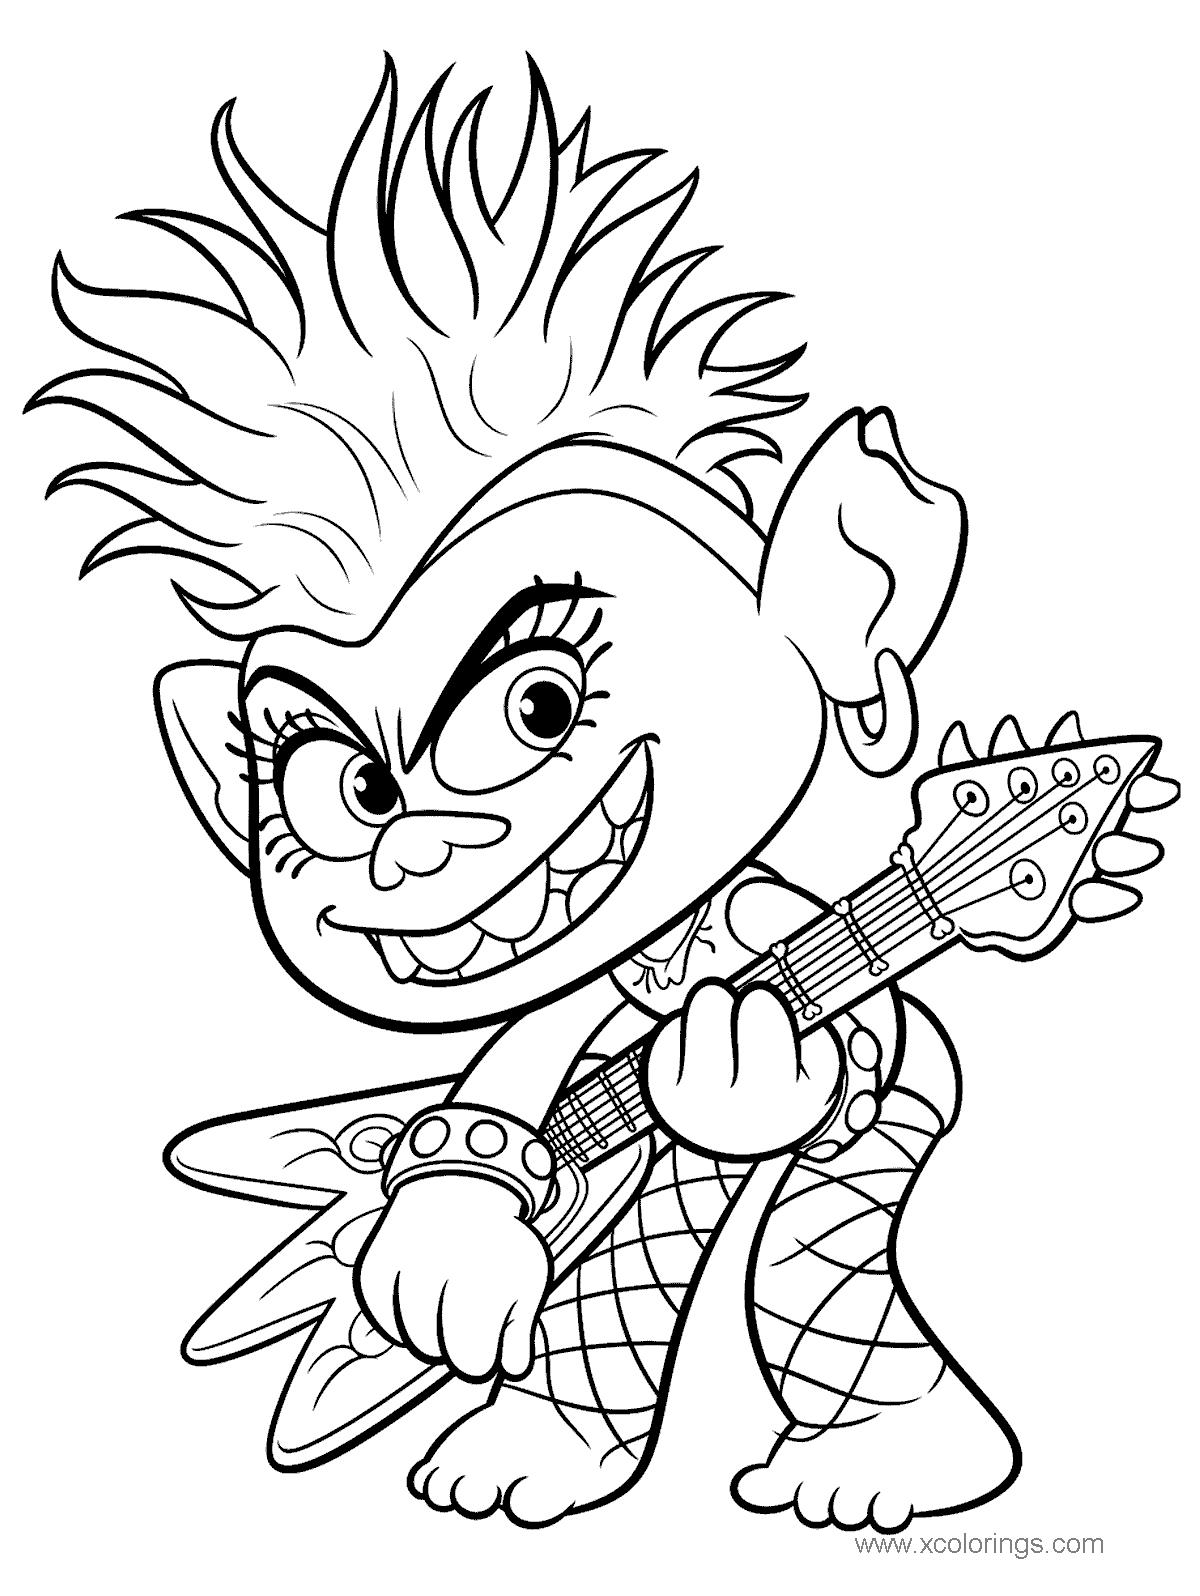 Free Queen Barb from Trolls World Tour Coloring Pages printable